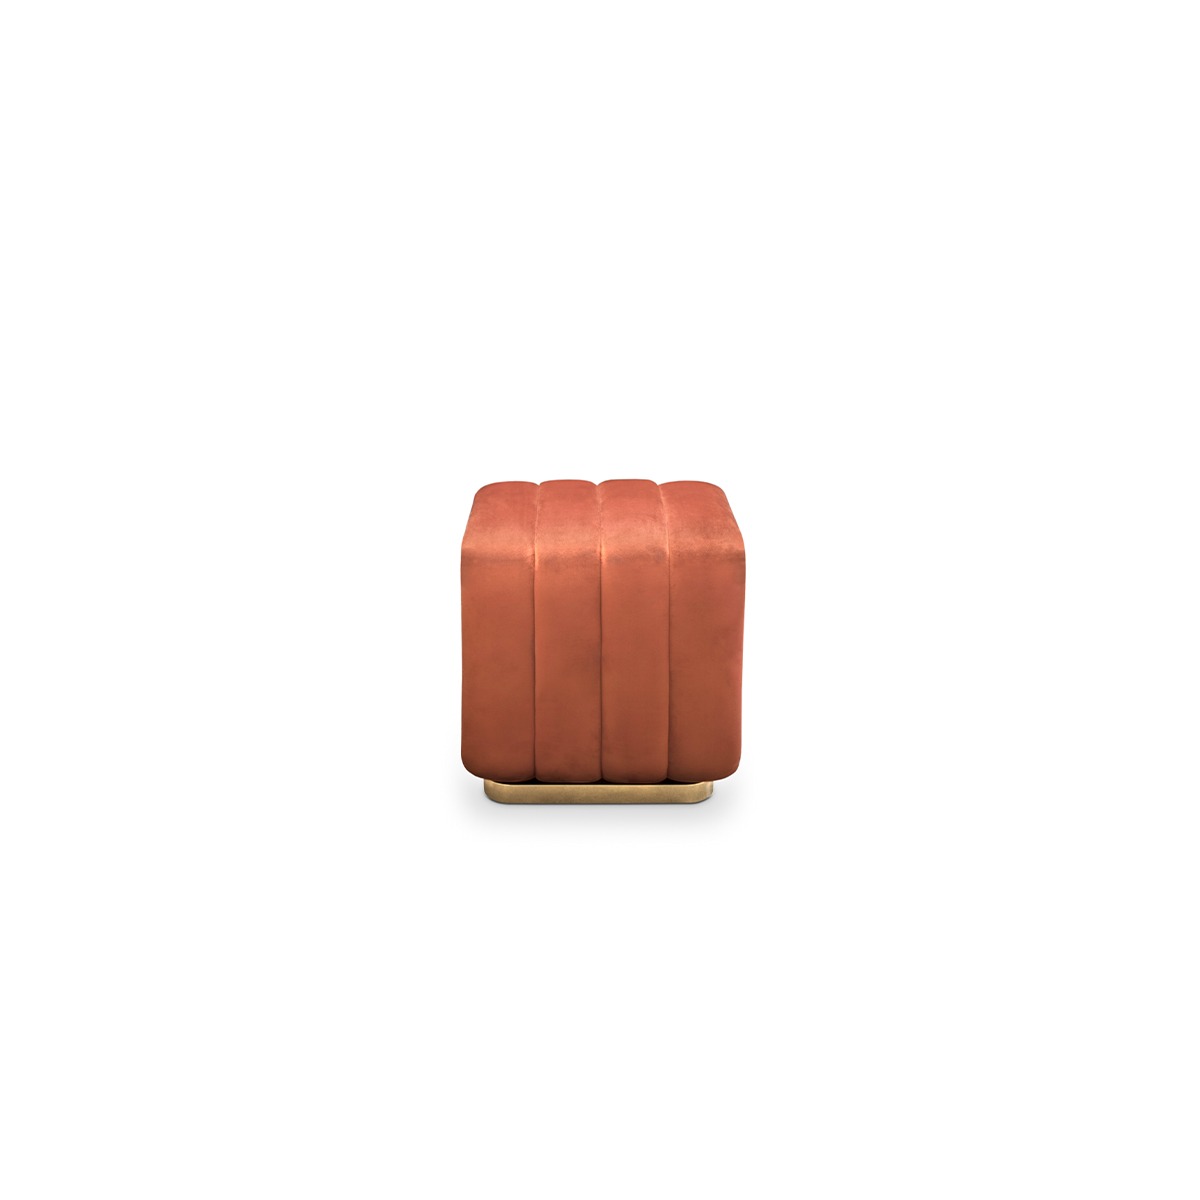 essential home minnelli stool 01 ESSENTIAL HOME